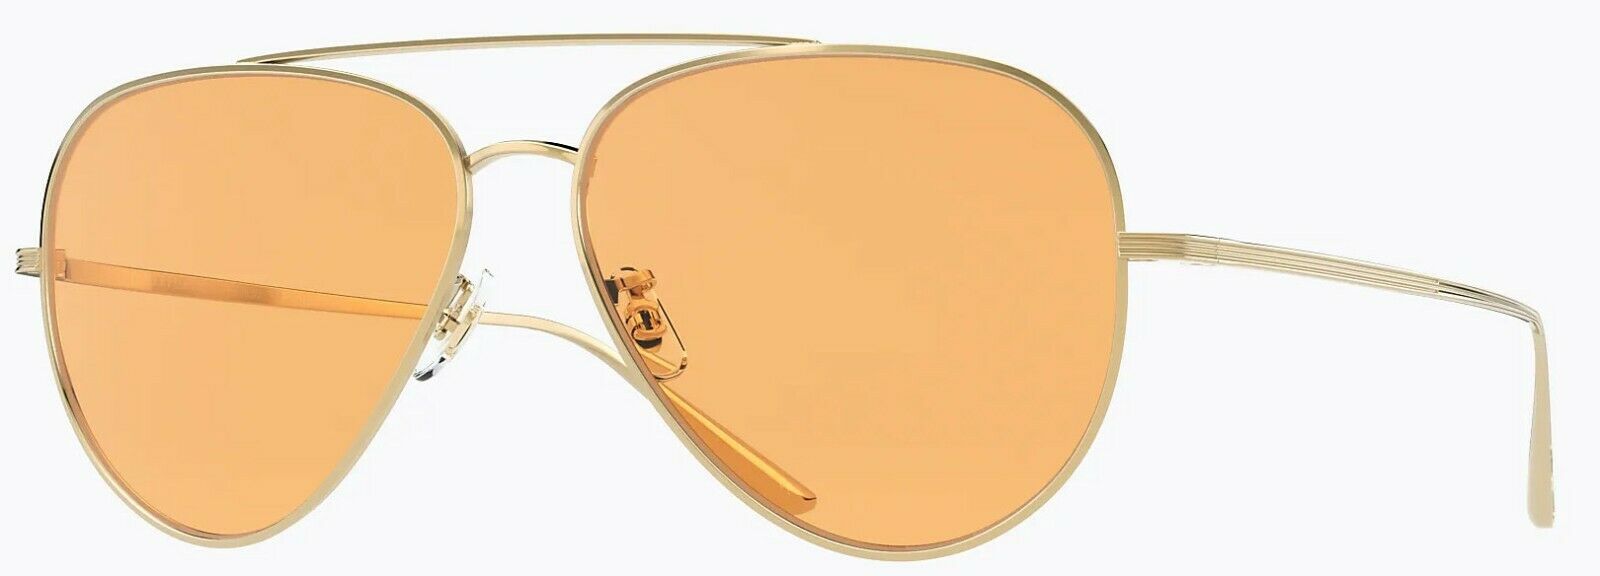 Oliver Peoples Sunglasses 1277ST 5292V9 The Row Casse Gold /Tangerine Photo 58mm-827934450943-classypw.com-1